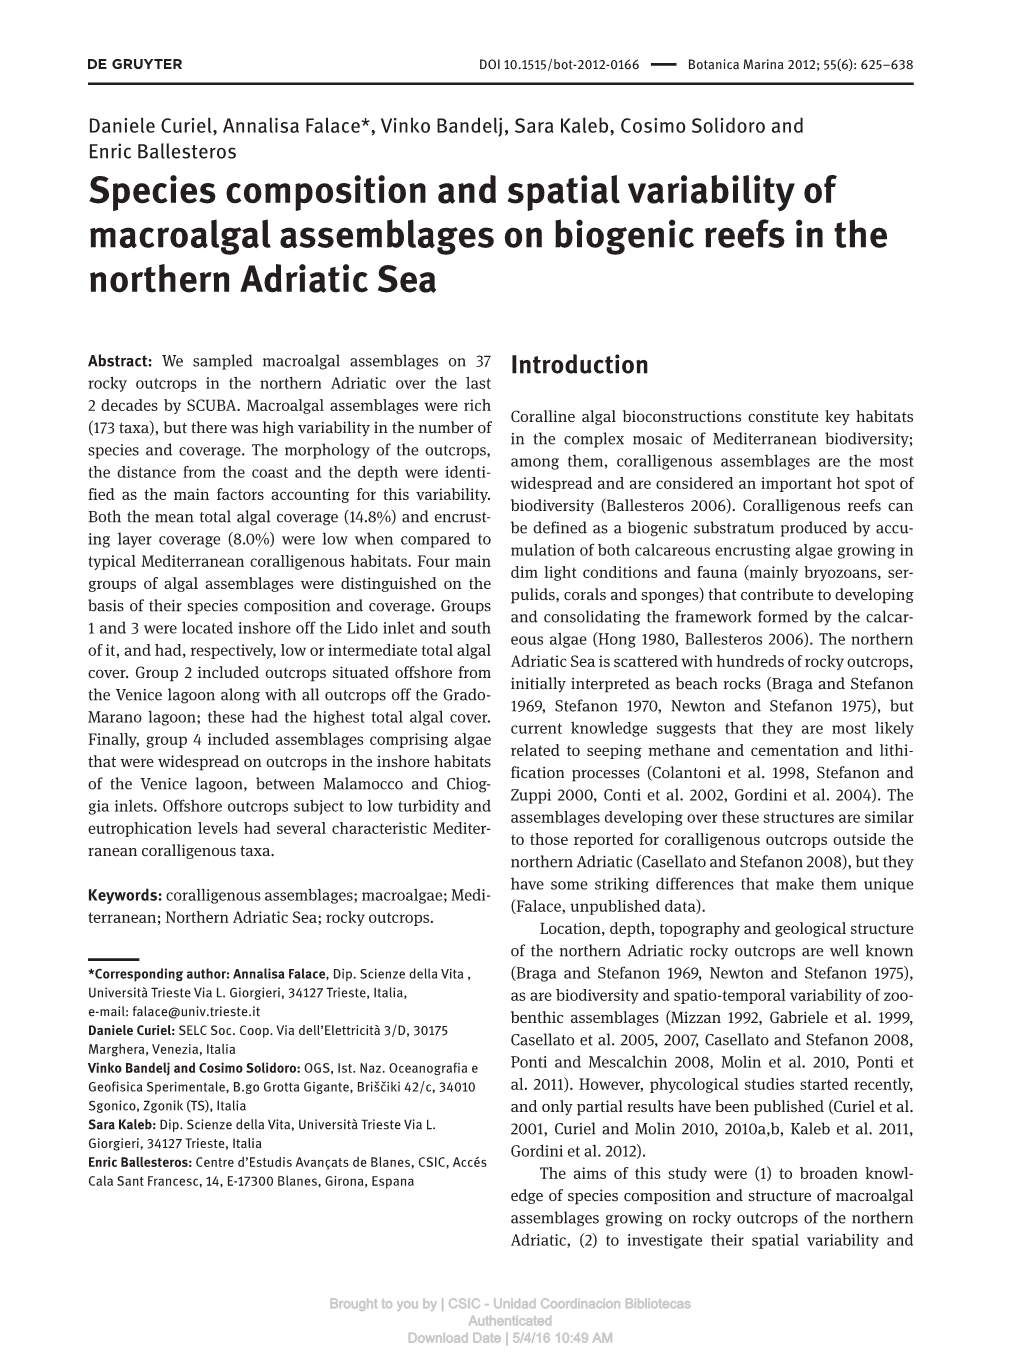 Species Composition and Spatial Variability of Macroalgal Assemblages on Biogenic Reefs in the Northern Adriatic Sea